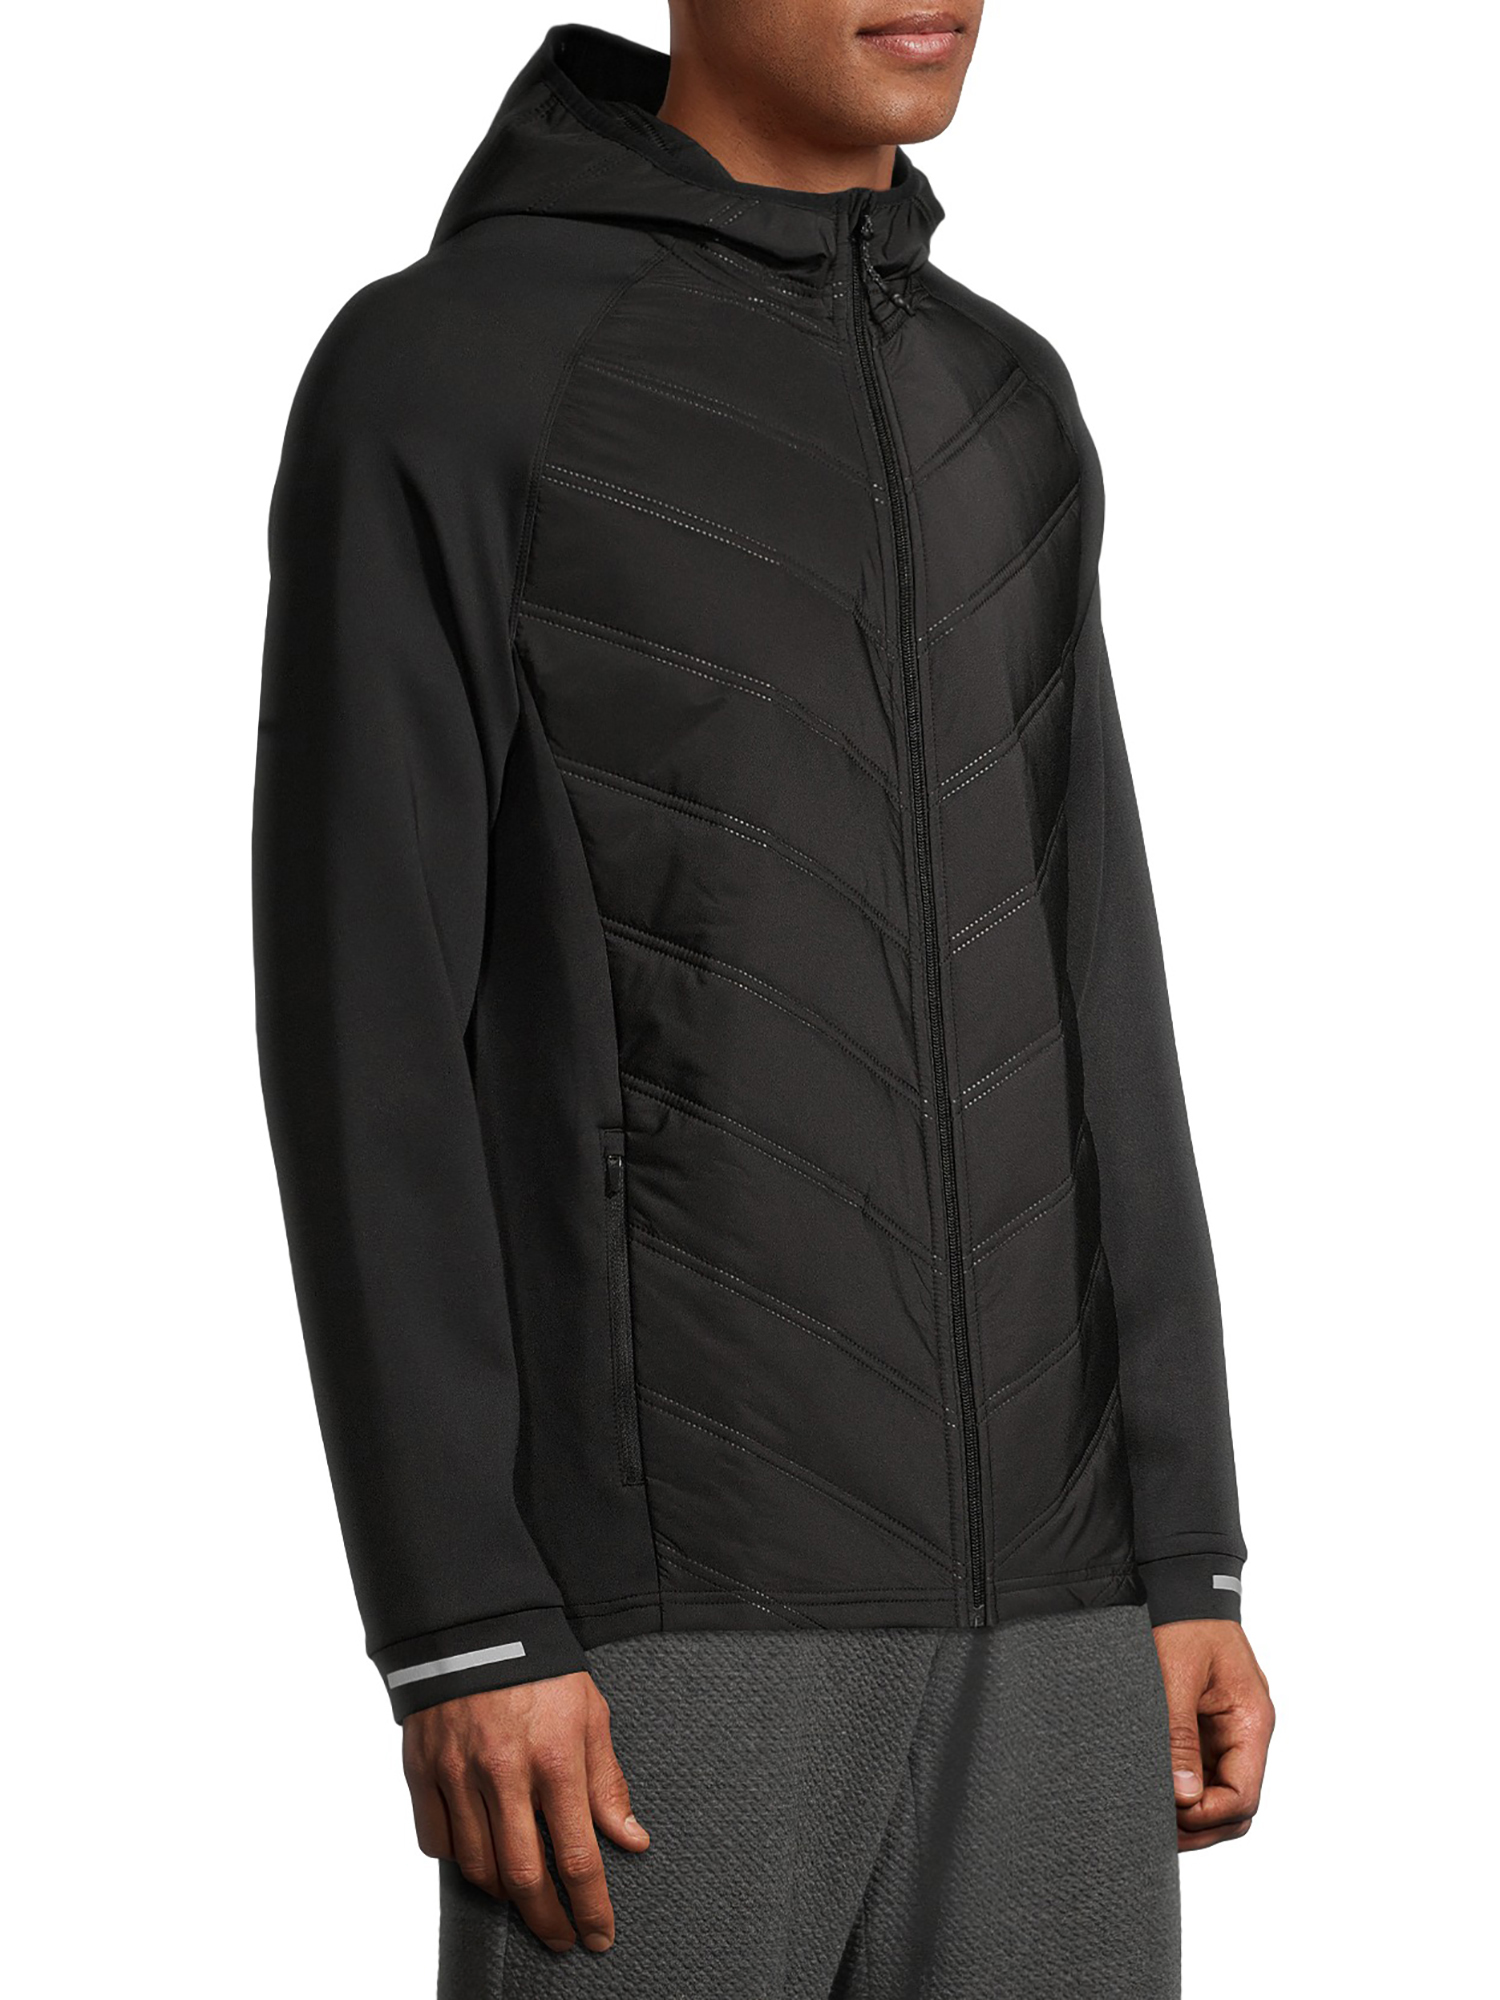 Russell Men's and Big Men's Active Performance Jacket, up to Size 3XL - image 4 of 6